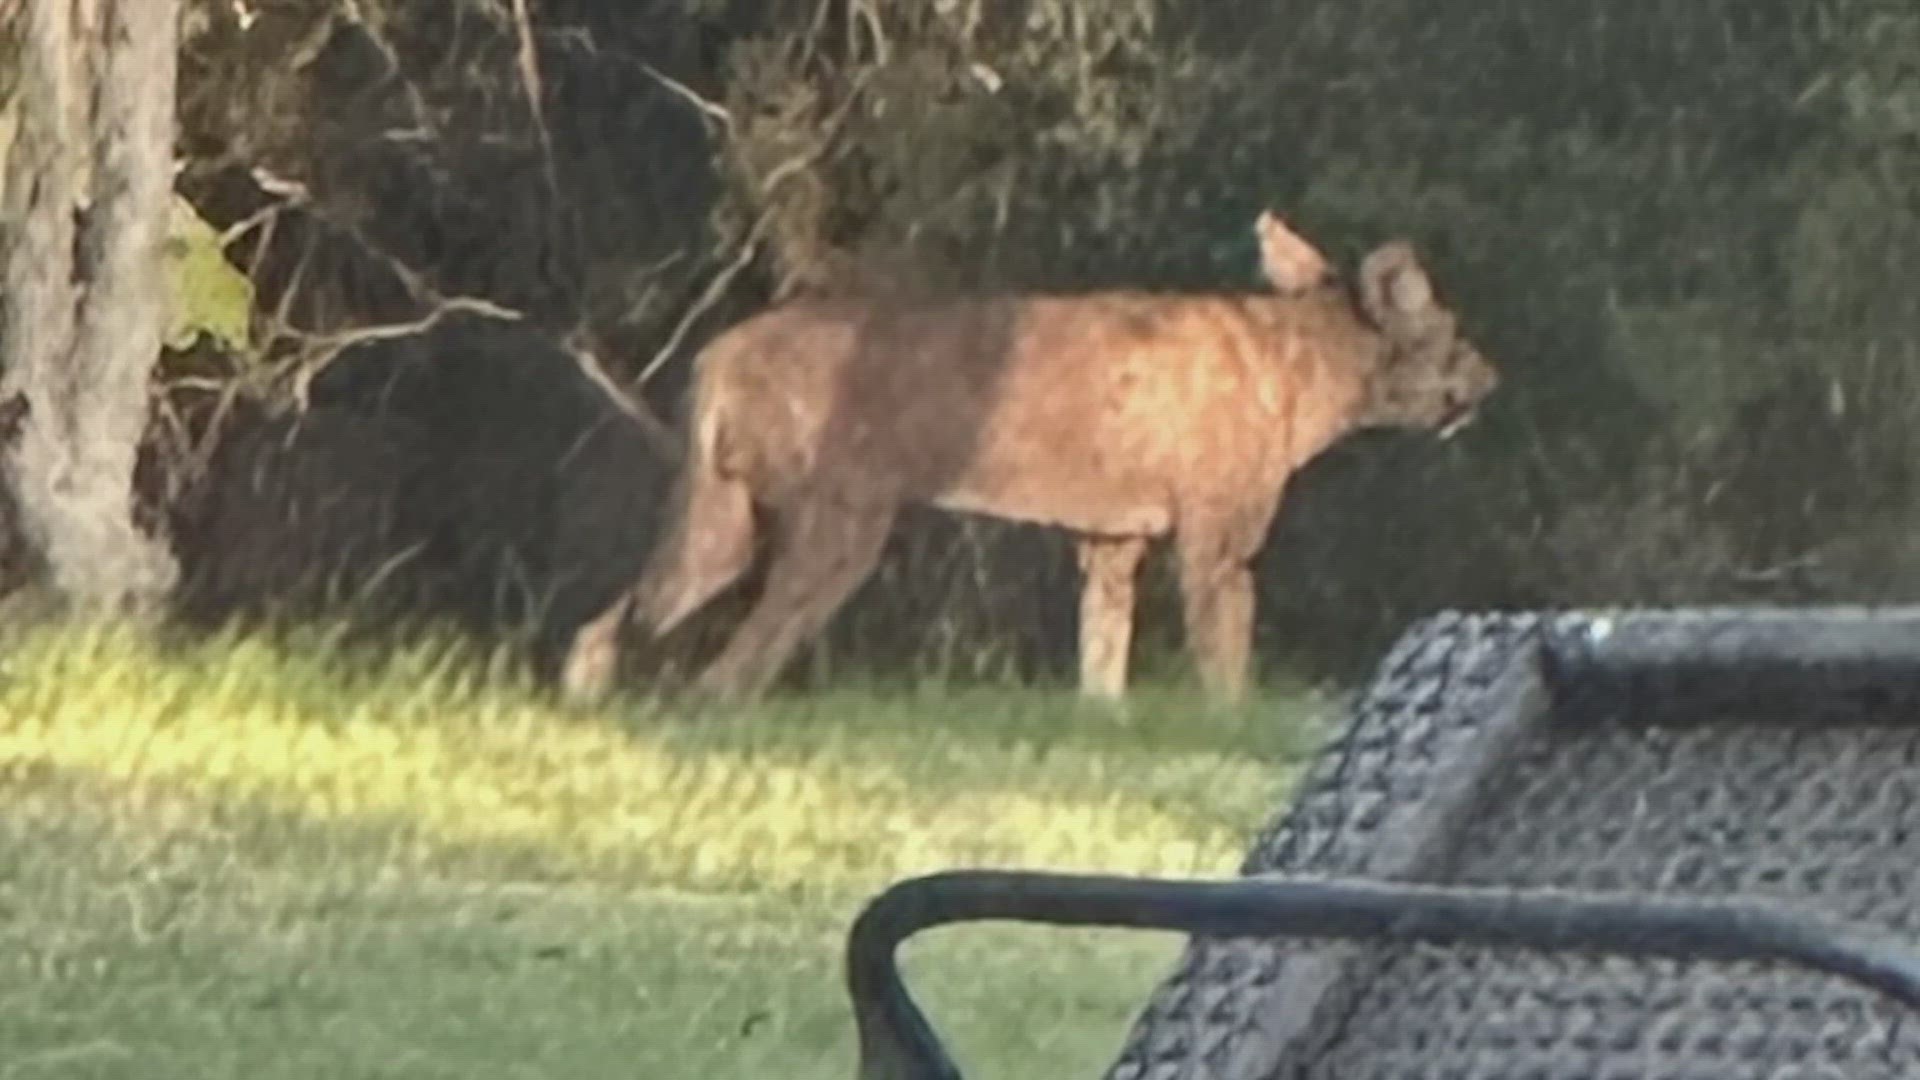 The wild animal was spotted at a north-side home on Tuesday. The property owner is now asking the public to help identify it.